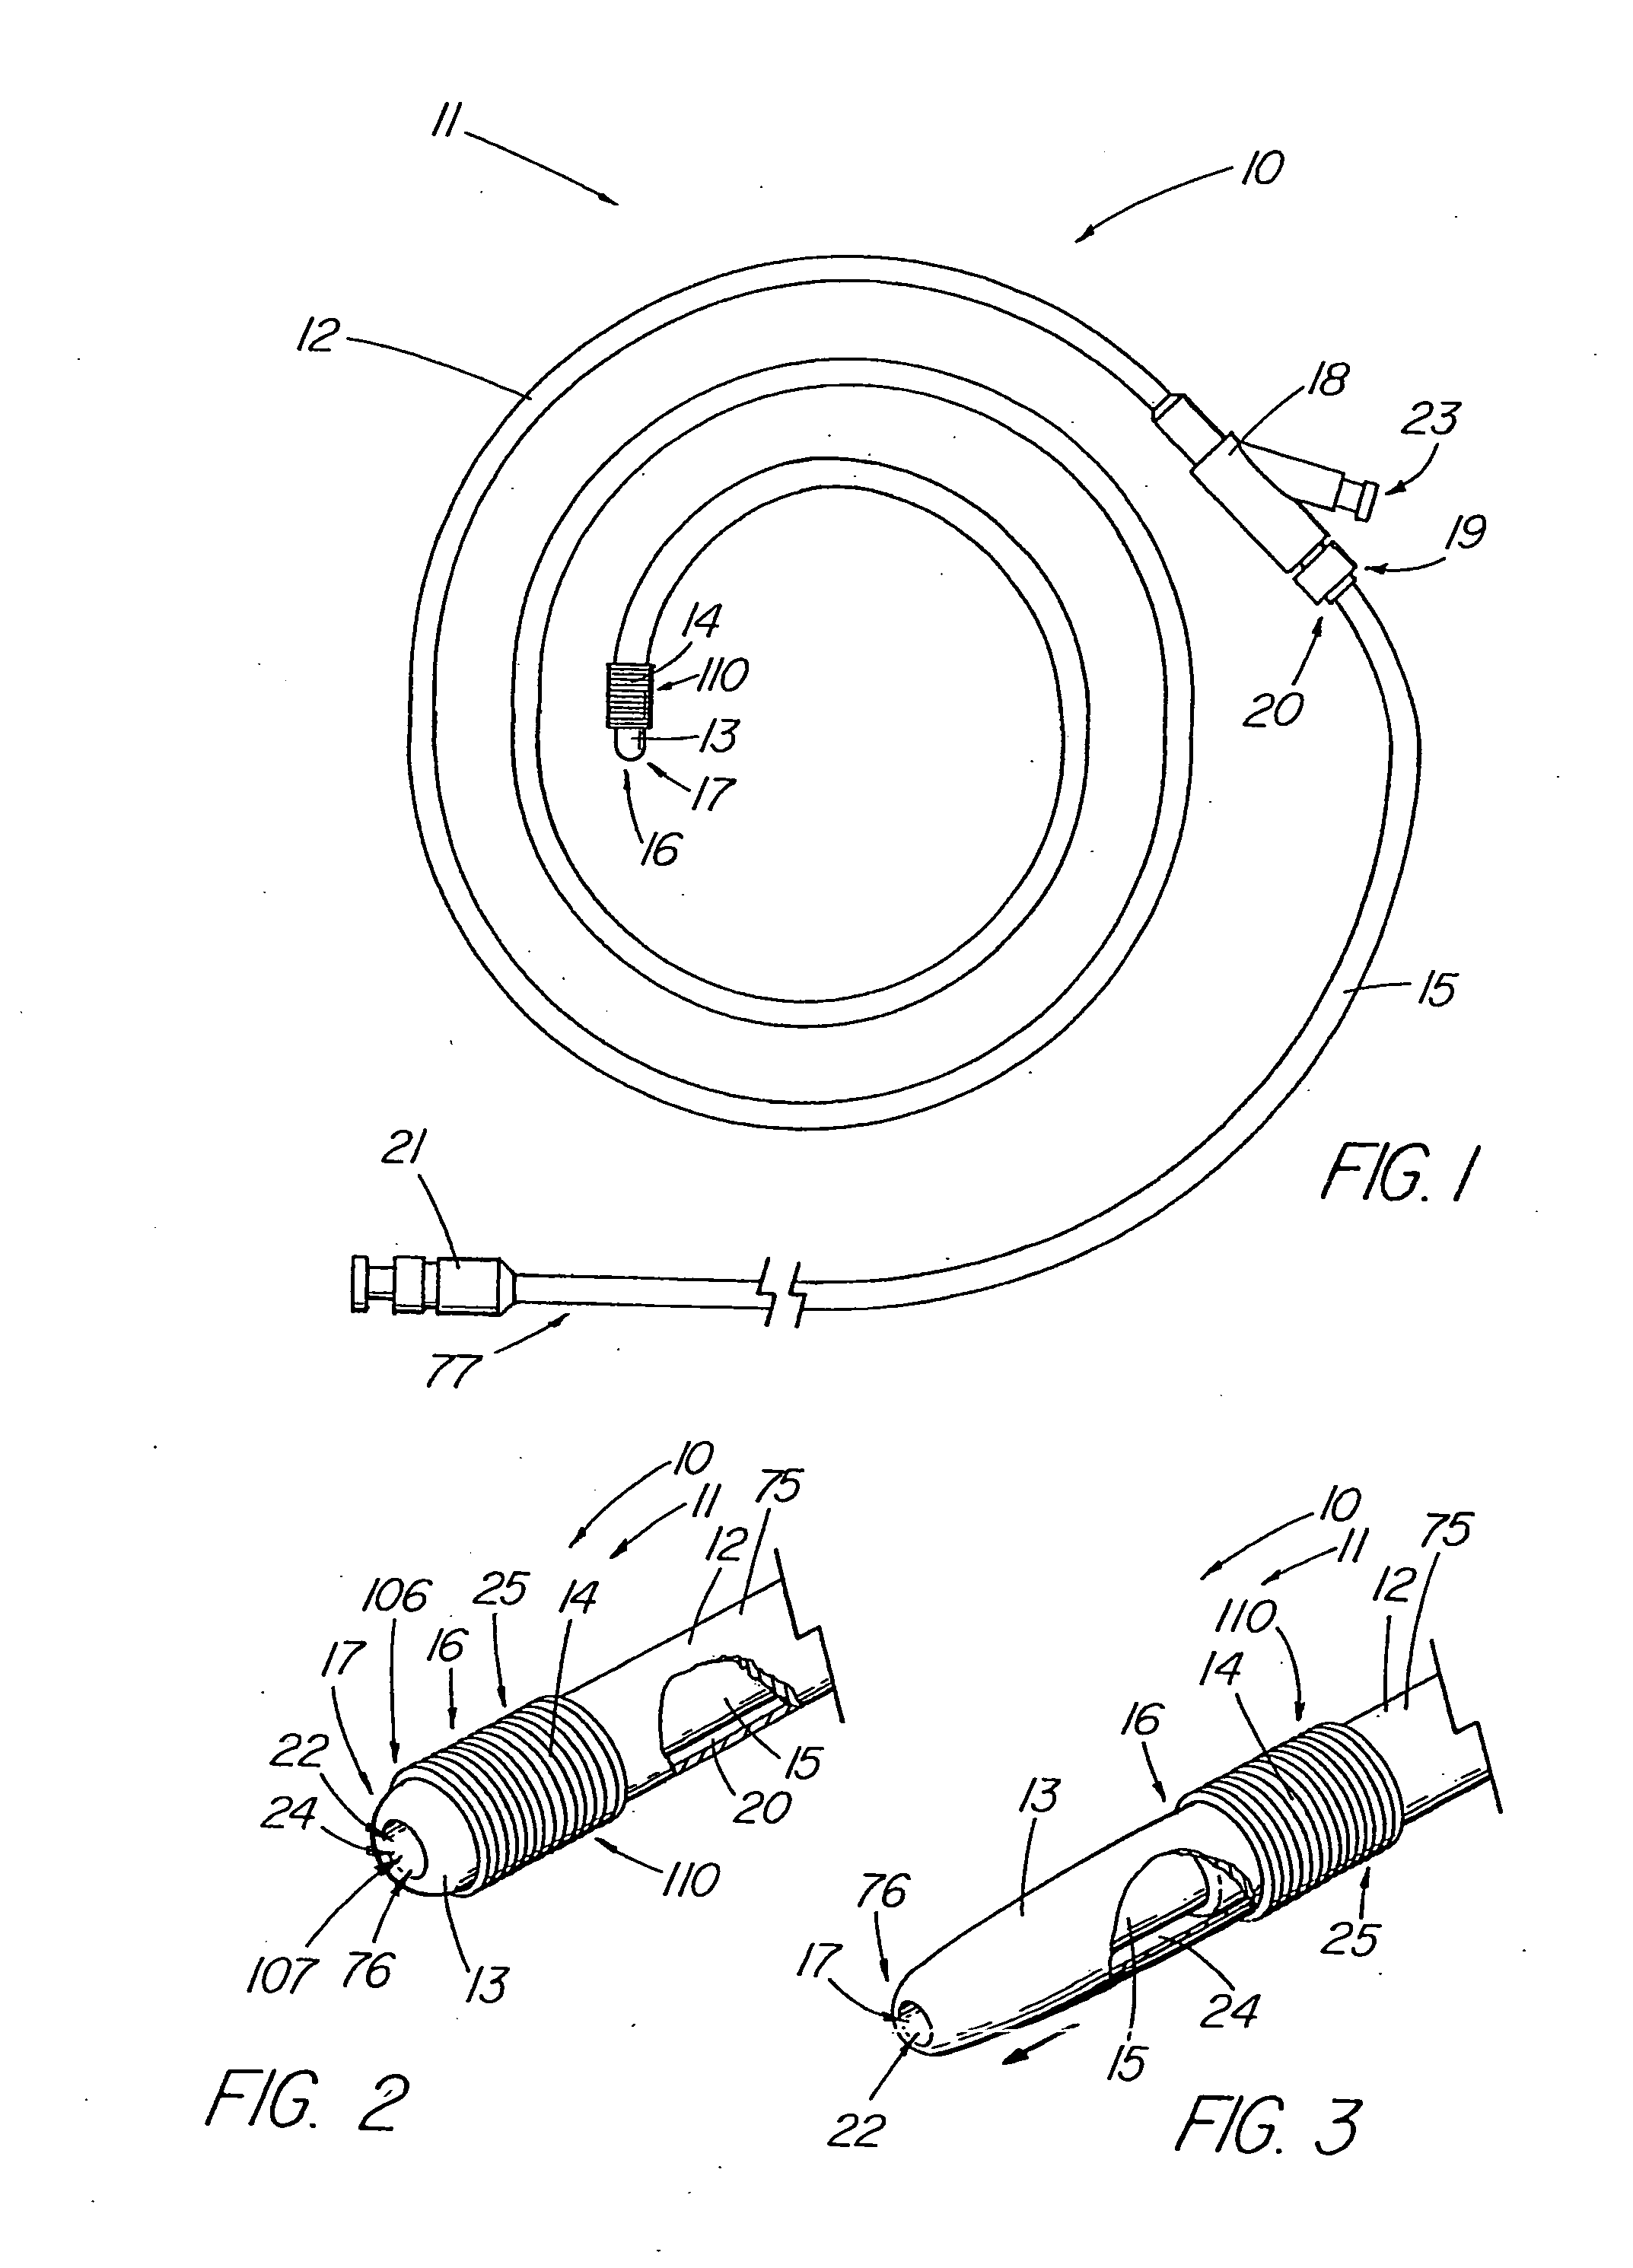 Introducer apparatus with eversible sleeve